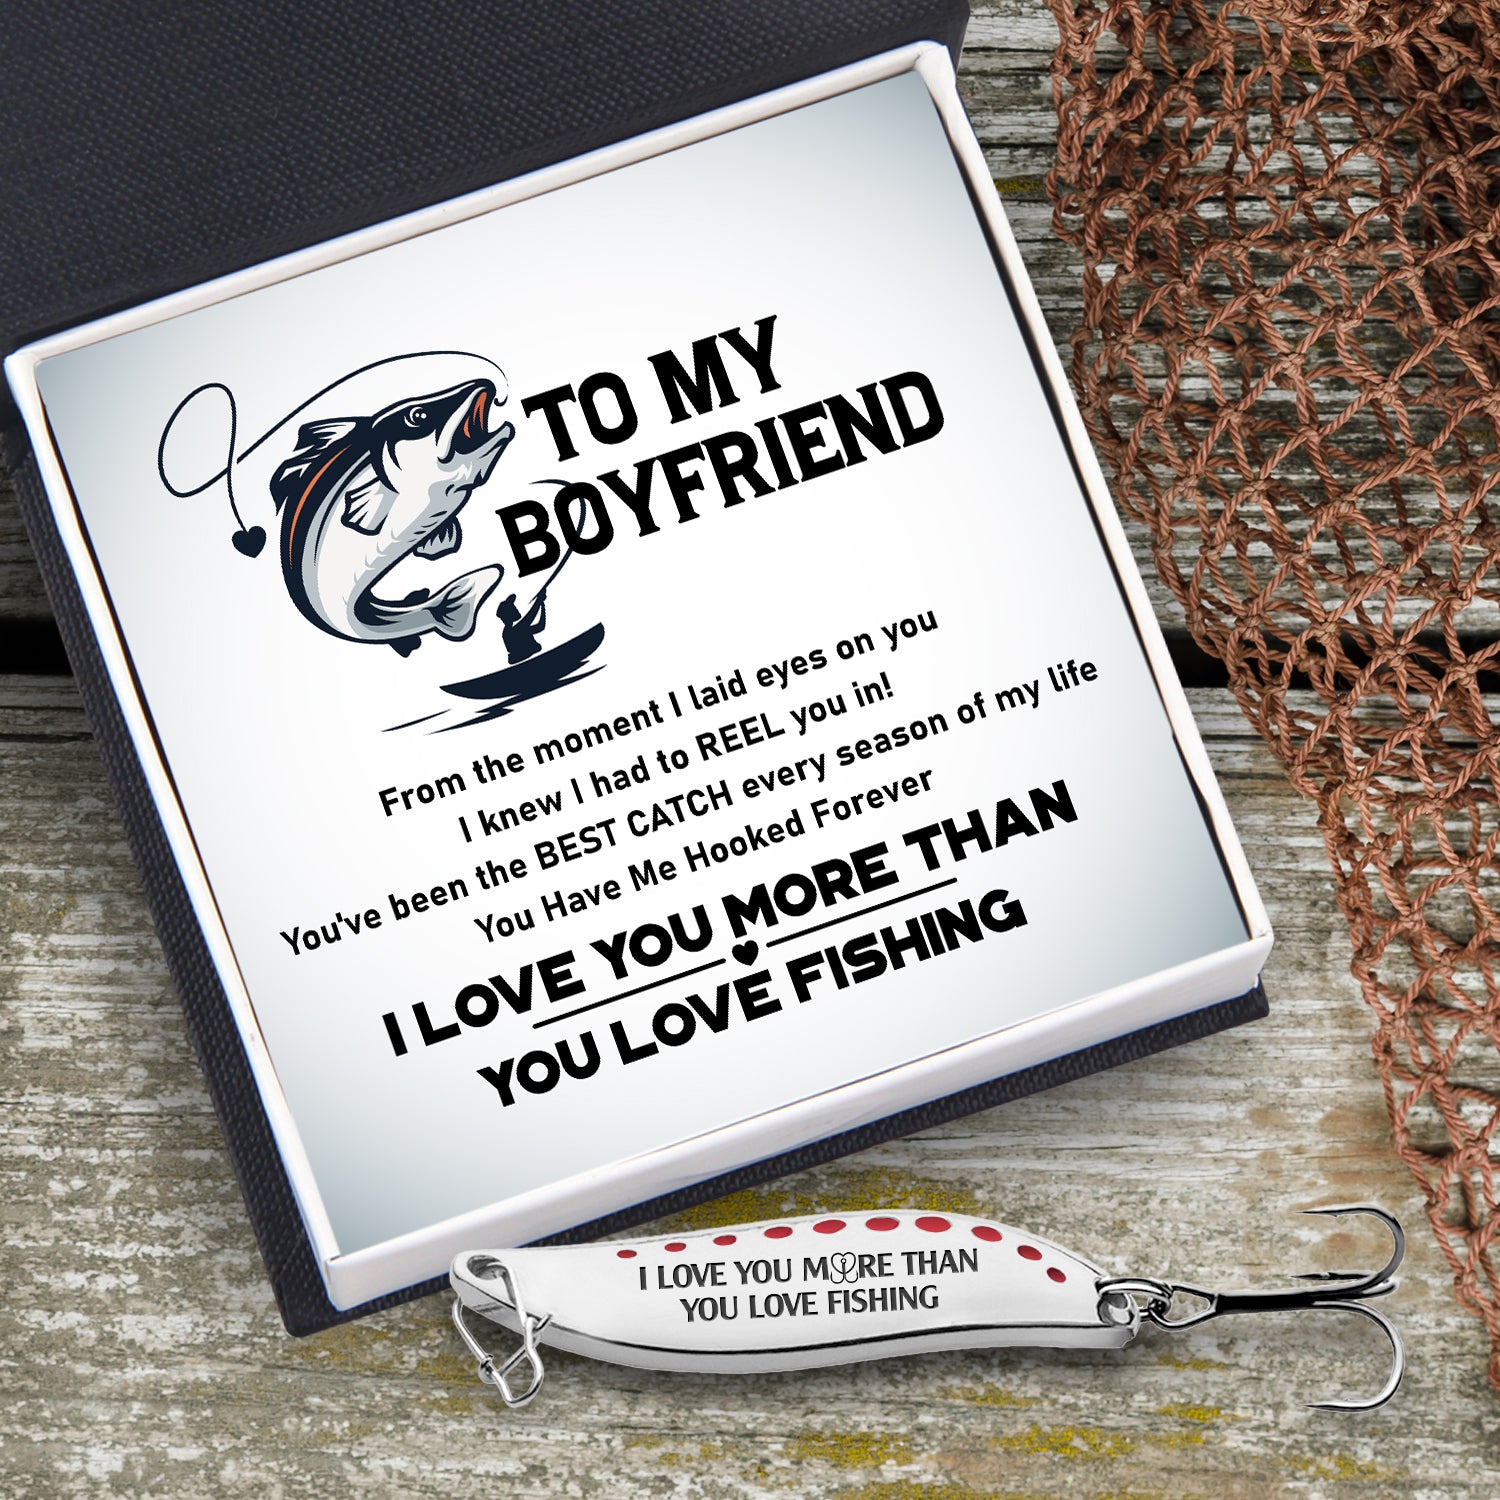 Fishing Spoon Lure - Fishing - To My Boyfriend - You Have Me Hooked Forever - Ukgfaa12004